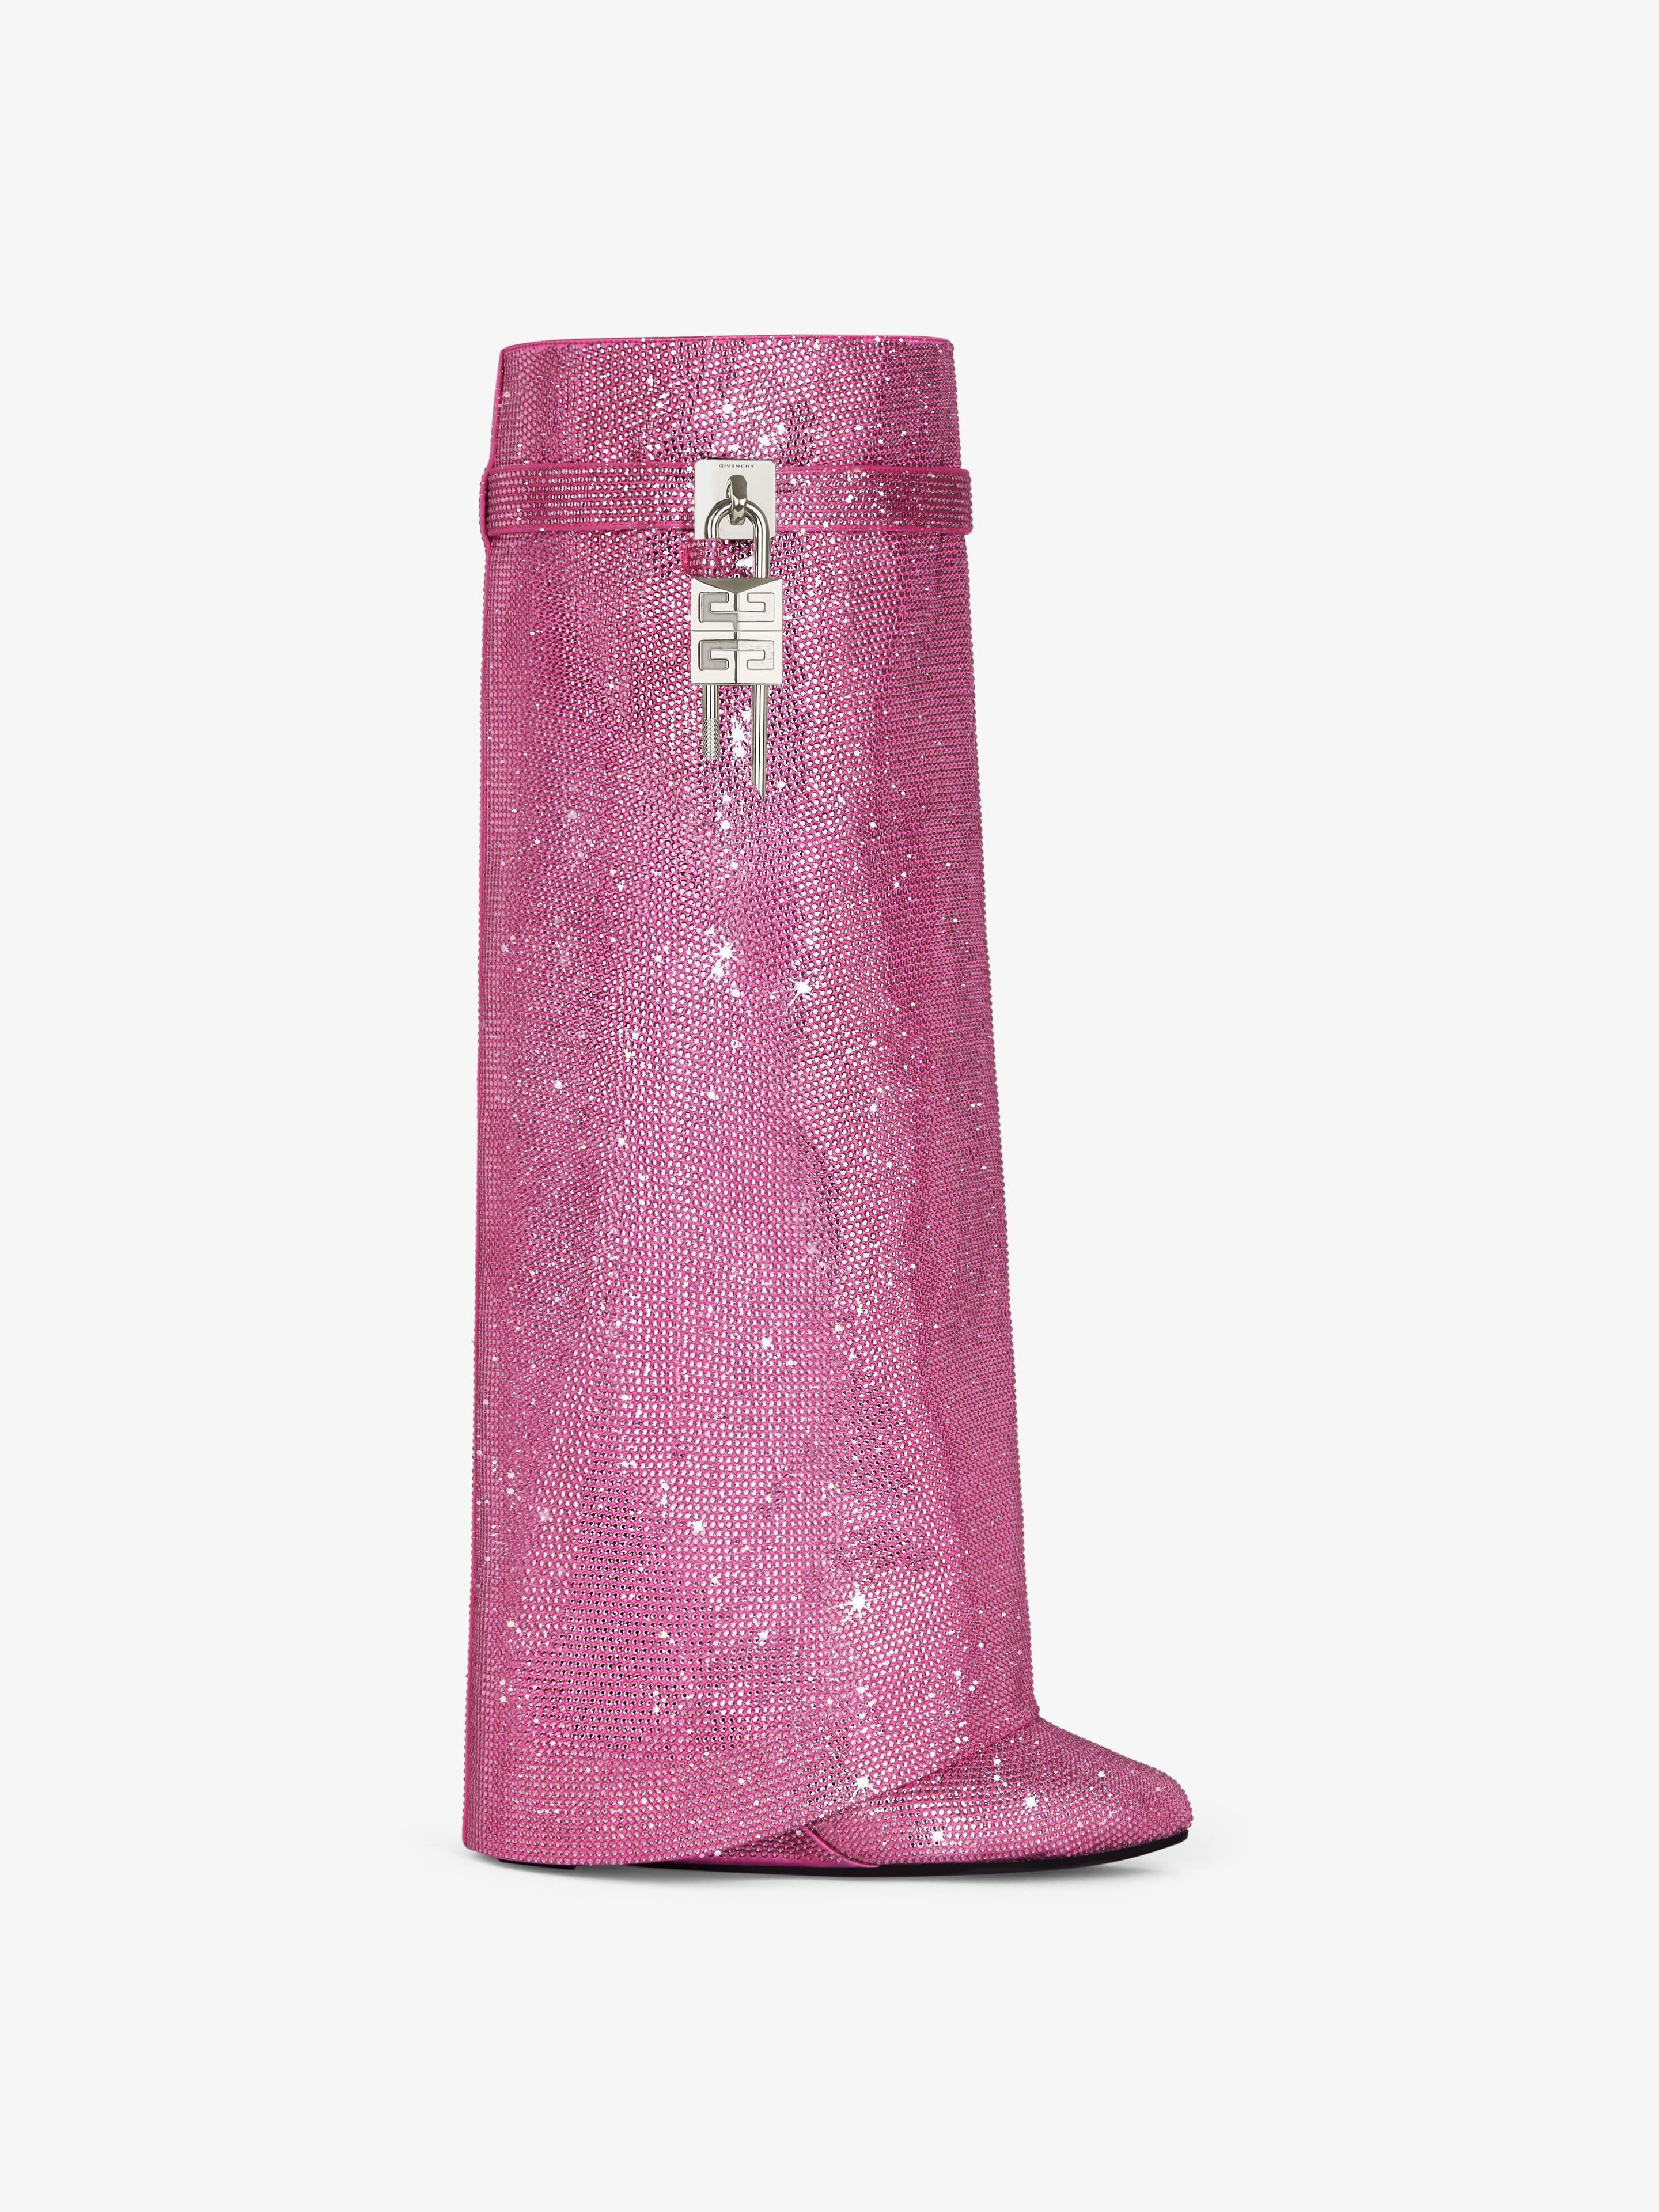 Givenchy Shark Lock Embellished Knee-high Boots In Neon Pink